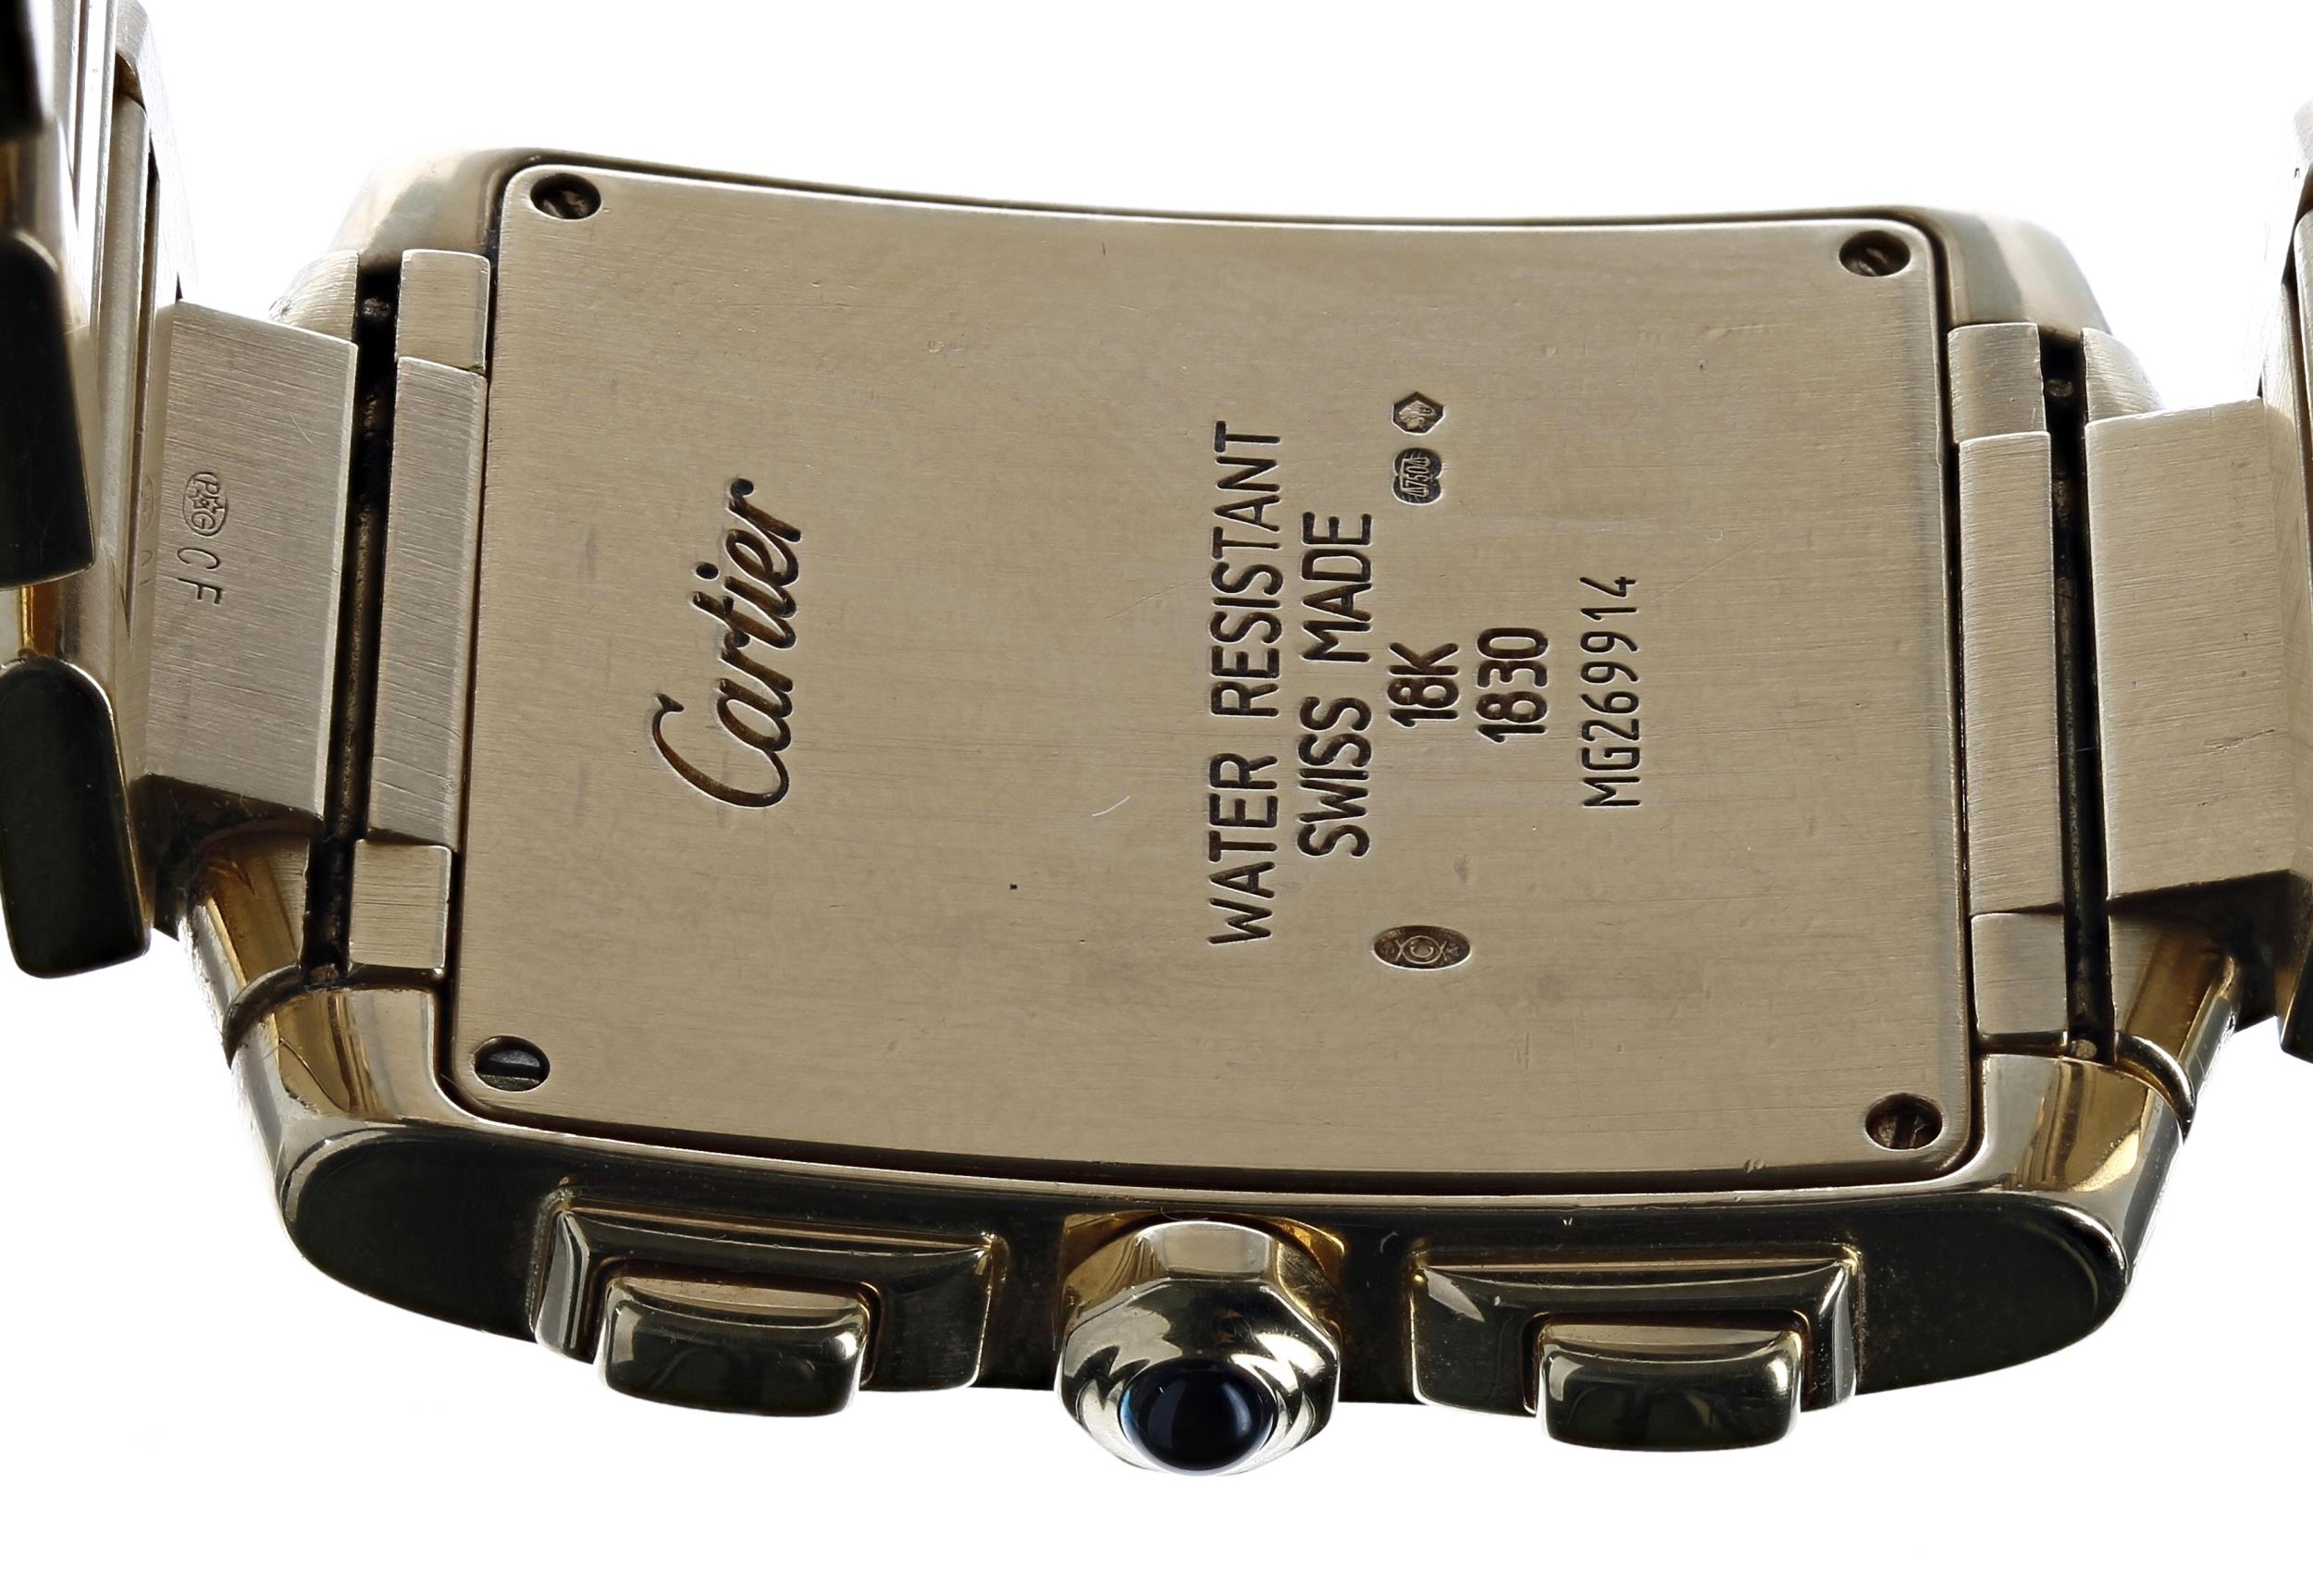 Cartier Tank Francaise Chronoflex 18ct gentleman's wristwatch, reference no. 1830, serial no. - Image 5 of 5